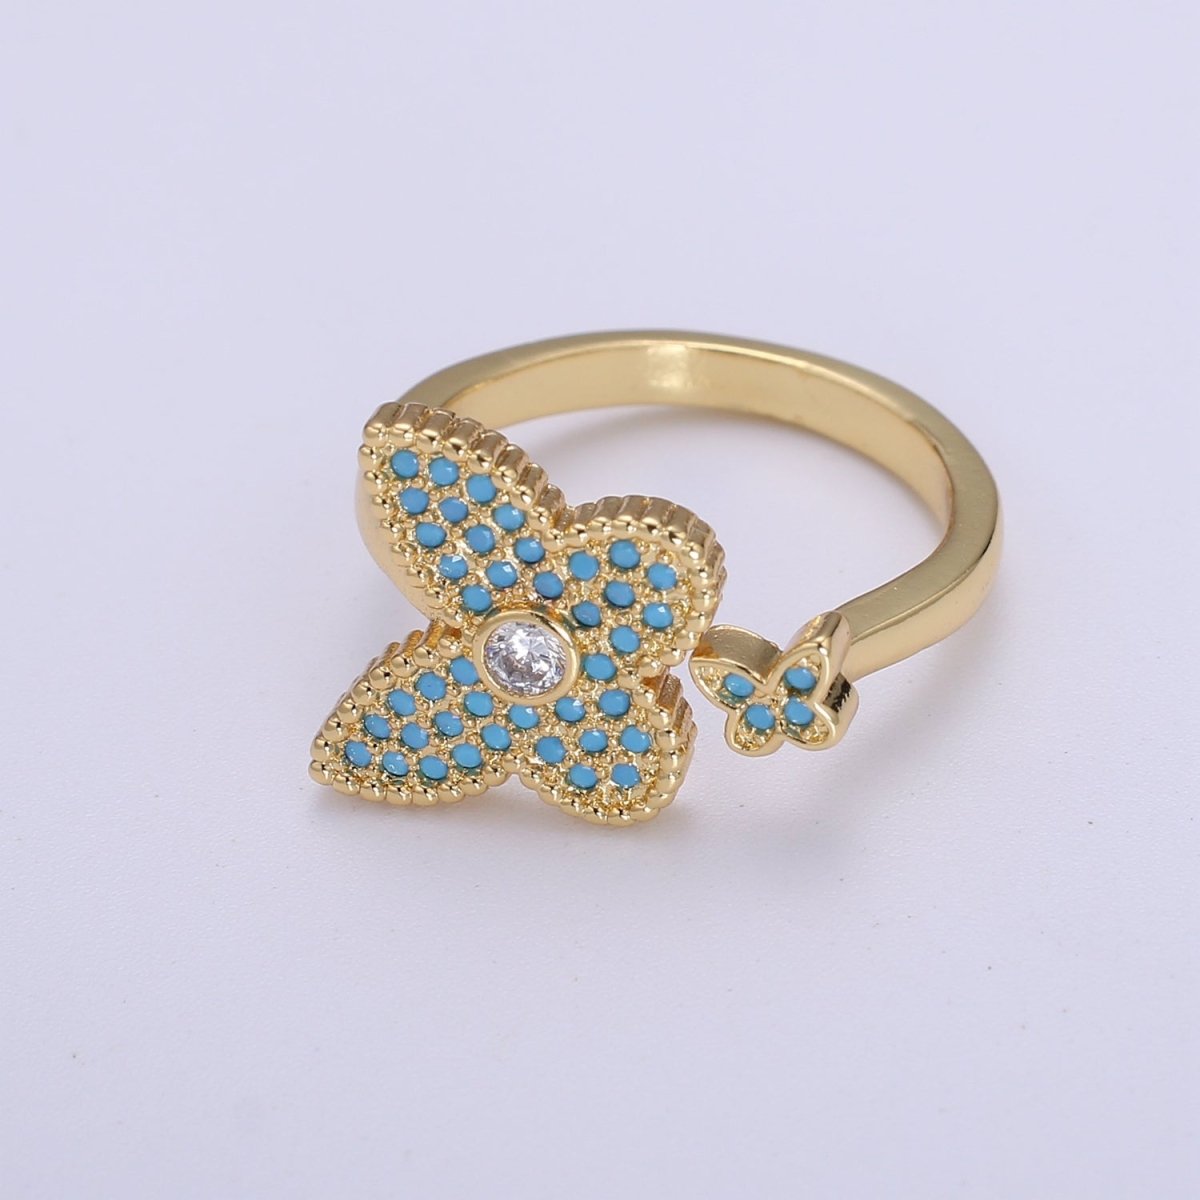 1x Dainty Butterfly Ring, Adjustable Gold Ring, Cz Mariposa Ring, Animal Lover Ring for Minimalist jewelry Everyday Wear O-273 ~ O-276 - DLUXCA